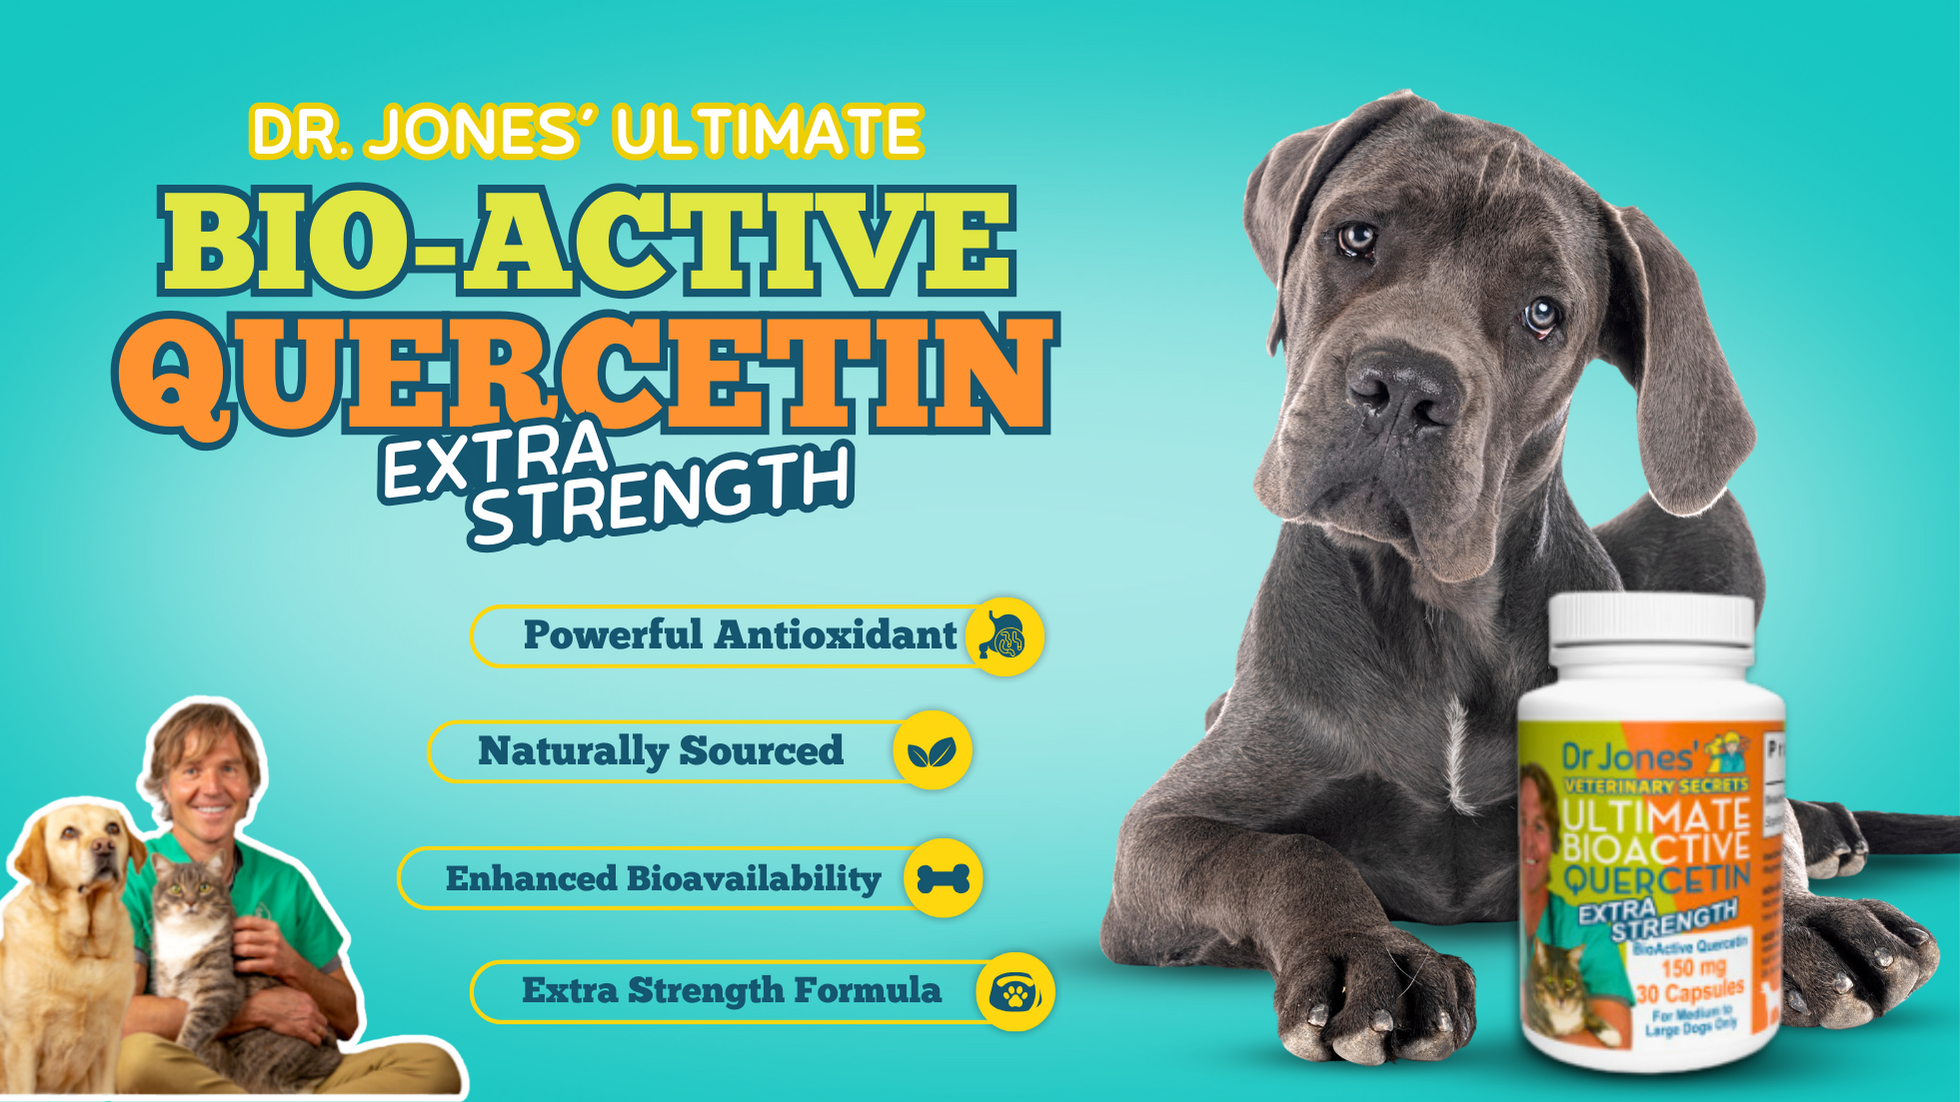 Dr. Jones' Extra Strength Ultimate BioActive Quercetin is Non-GMO and gluten free, and contains no wheat, corn, soy, or any artificial colors, flavors, or preservatives. The supplement is in capsule form (powder in capsules), containing 150mg Quercetin per capsule, with 30 capsules per jar. Bio-Active Quercetin Extra Strength version is Recommended for Medium to Large Dogs Only.